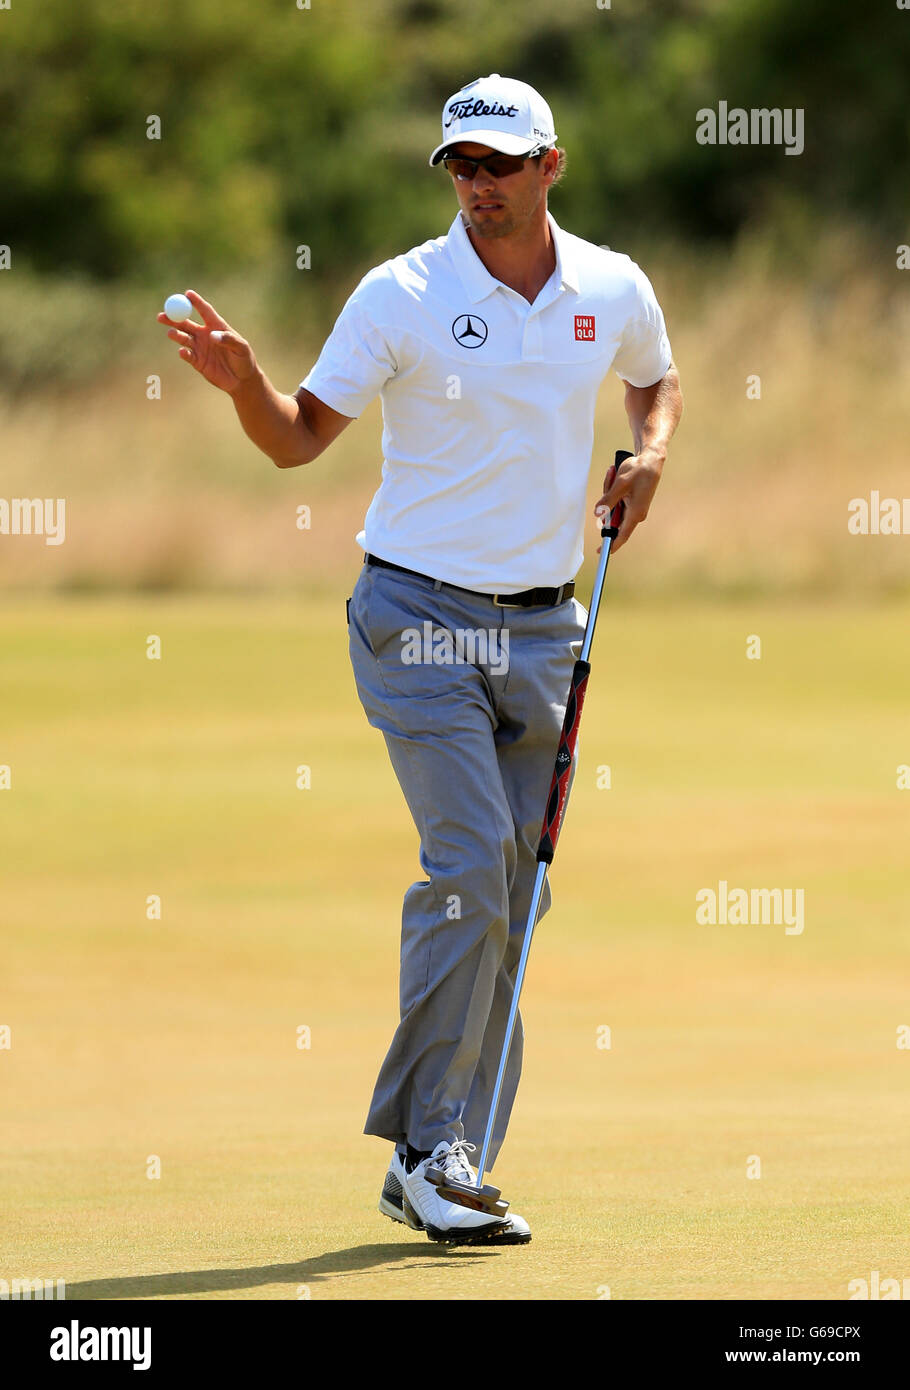 Australia's Adam Scott putting on the 2nd green during day three of the 2013 Open Championship at Muirfield Golf Club, East Lothian. Stock Photo